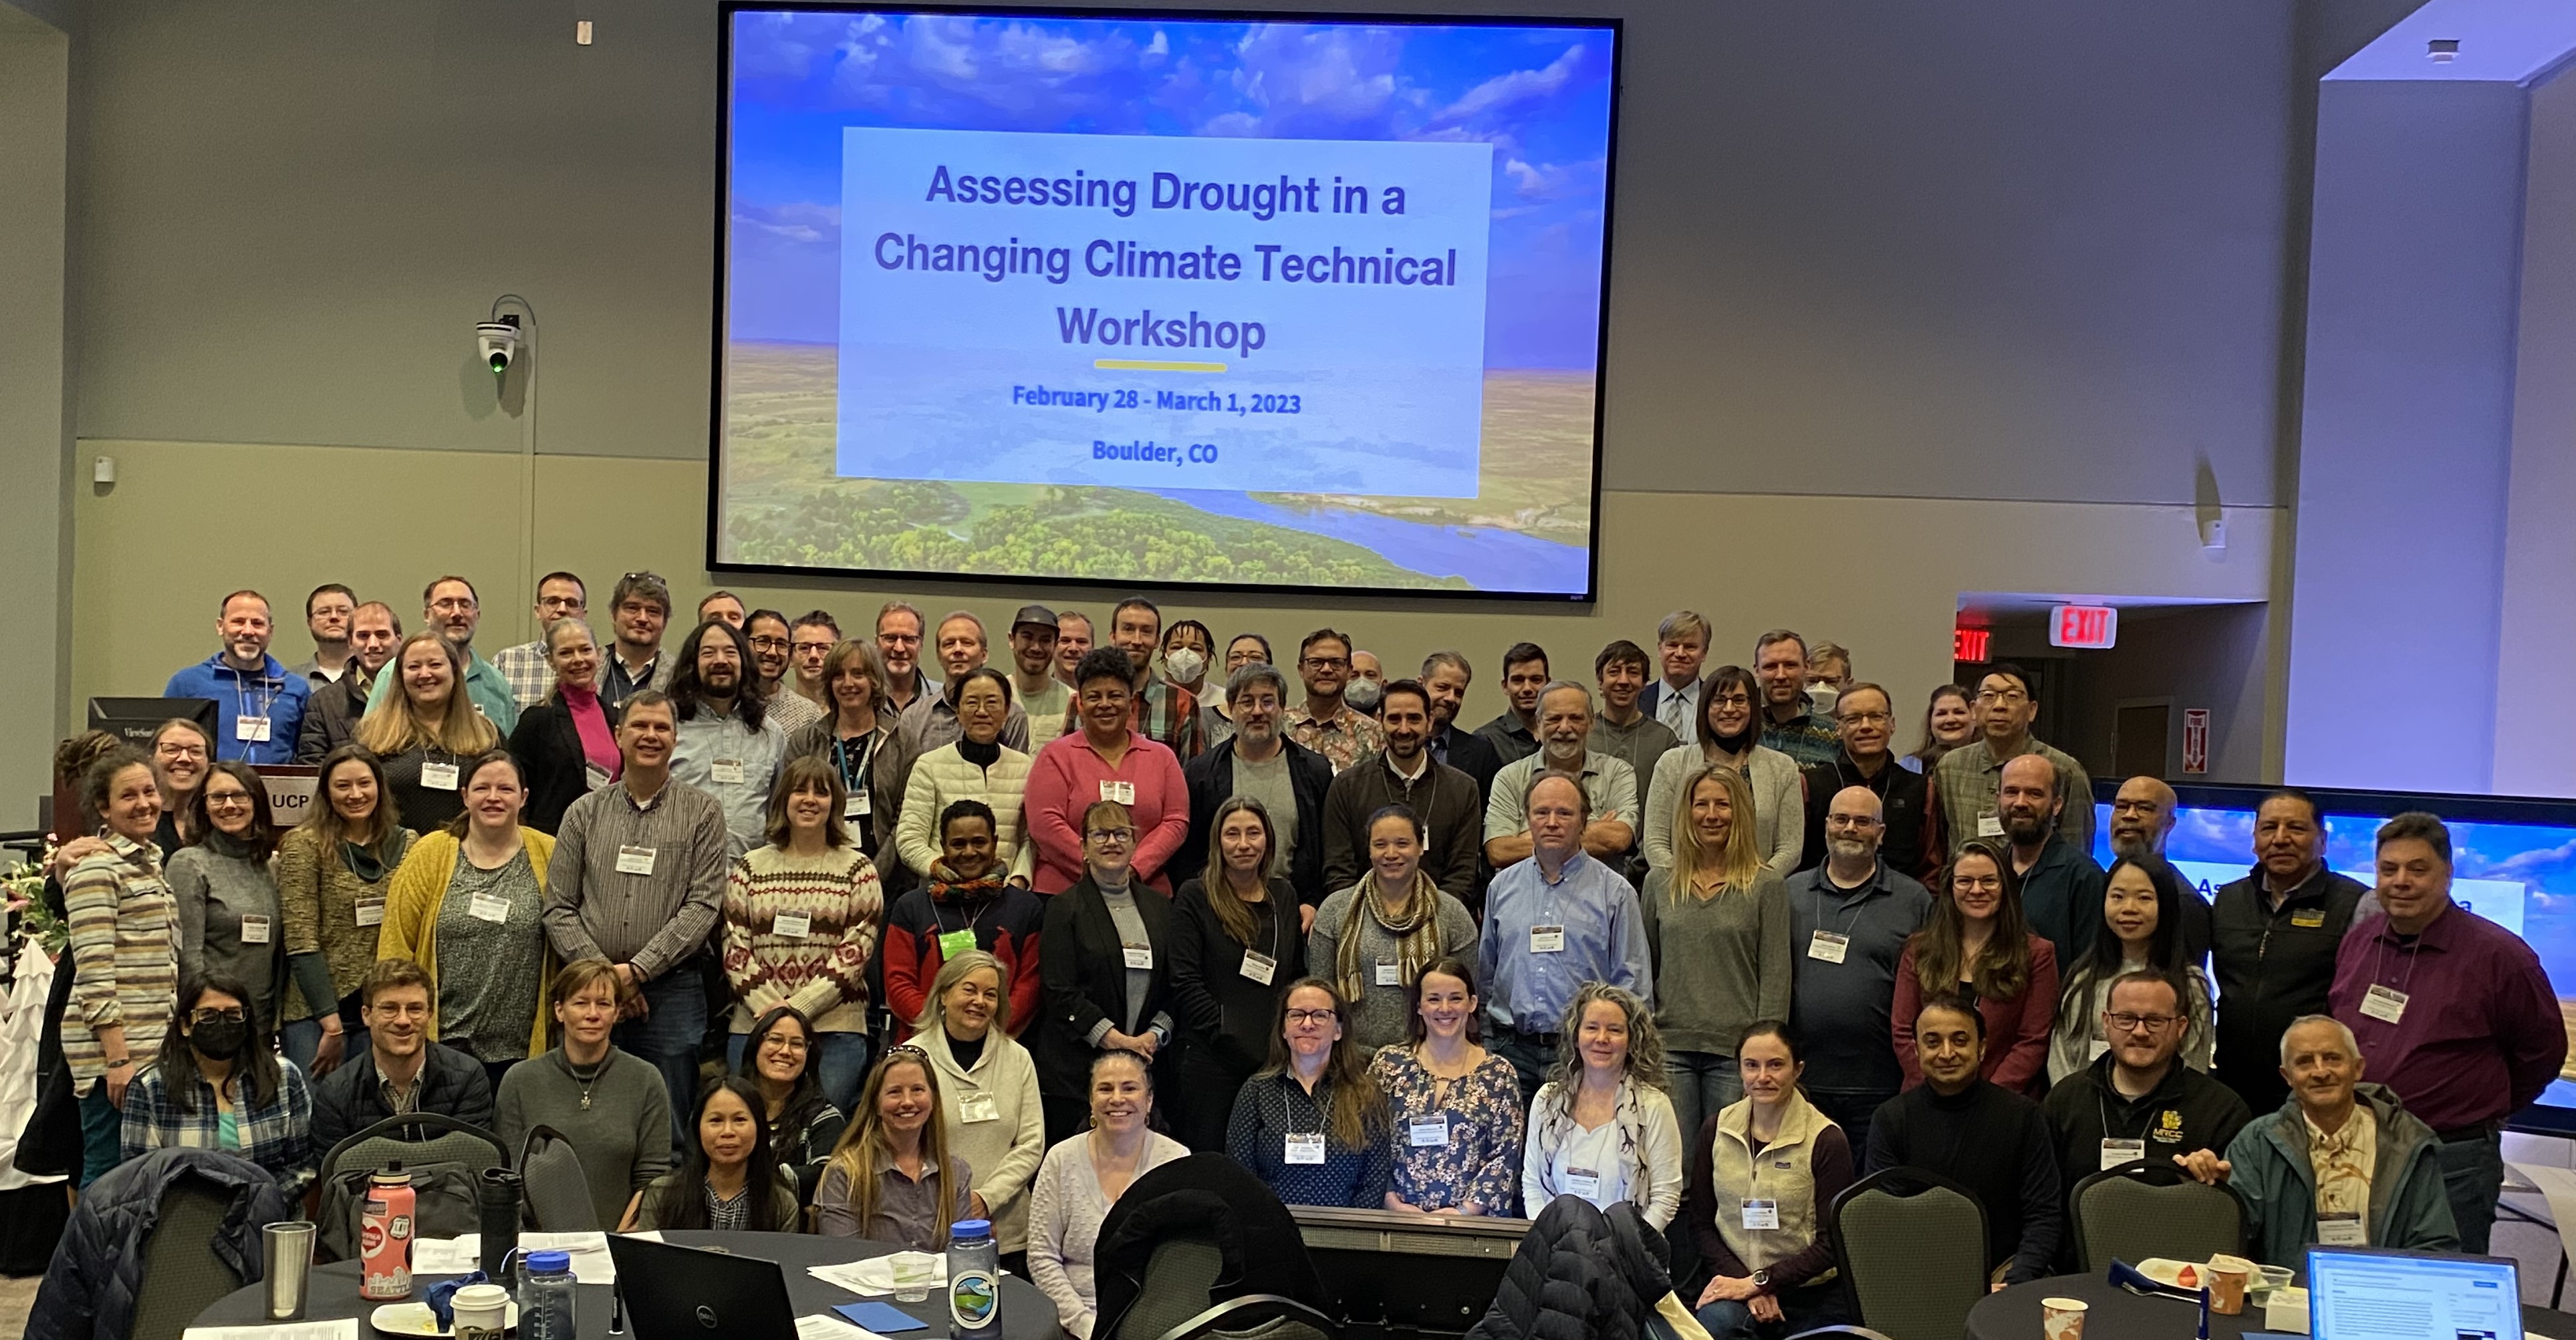 A group of people standing in front of a projector screen that reads Assessing drought in a changing climate technical workshop - February 28-March 1, 2023 - Boulder, CO